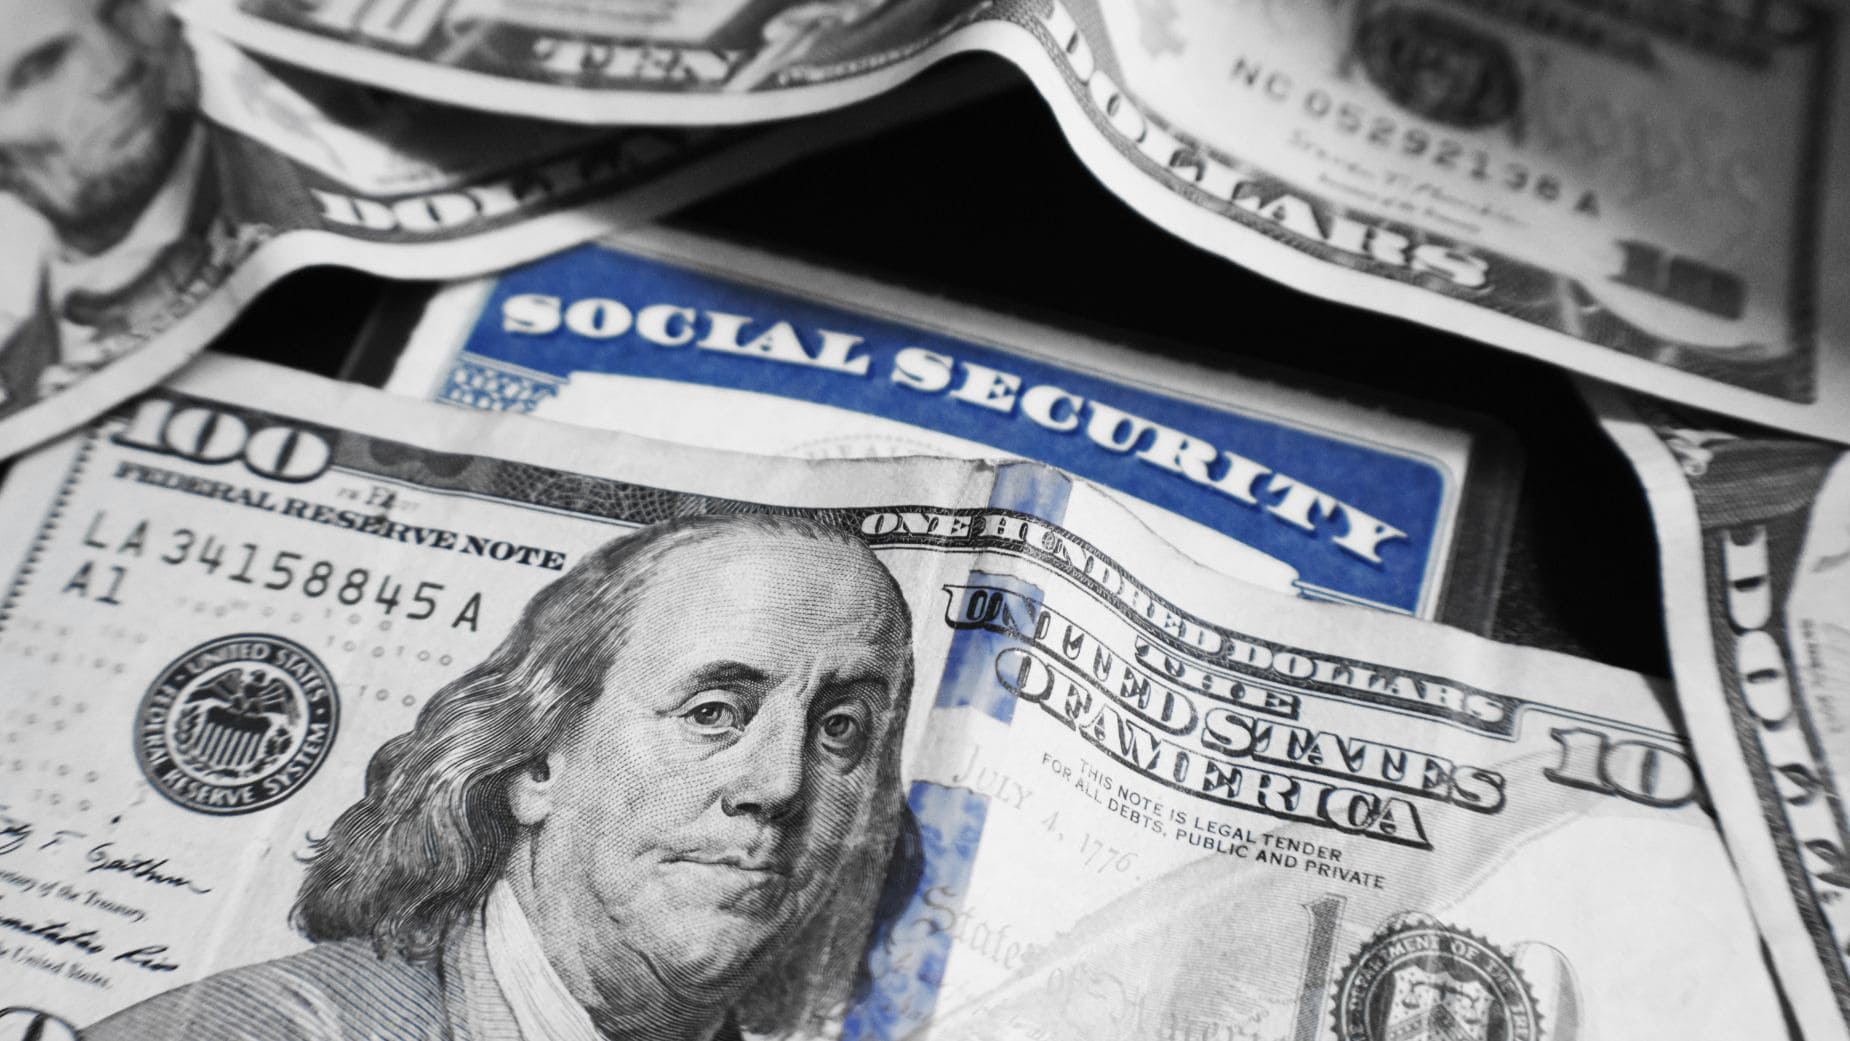 Get a new Social Security paycheck tomorrow